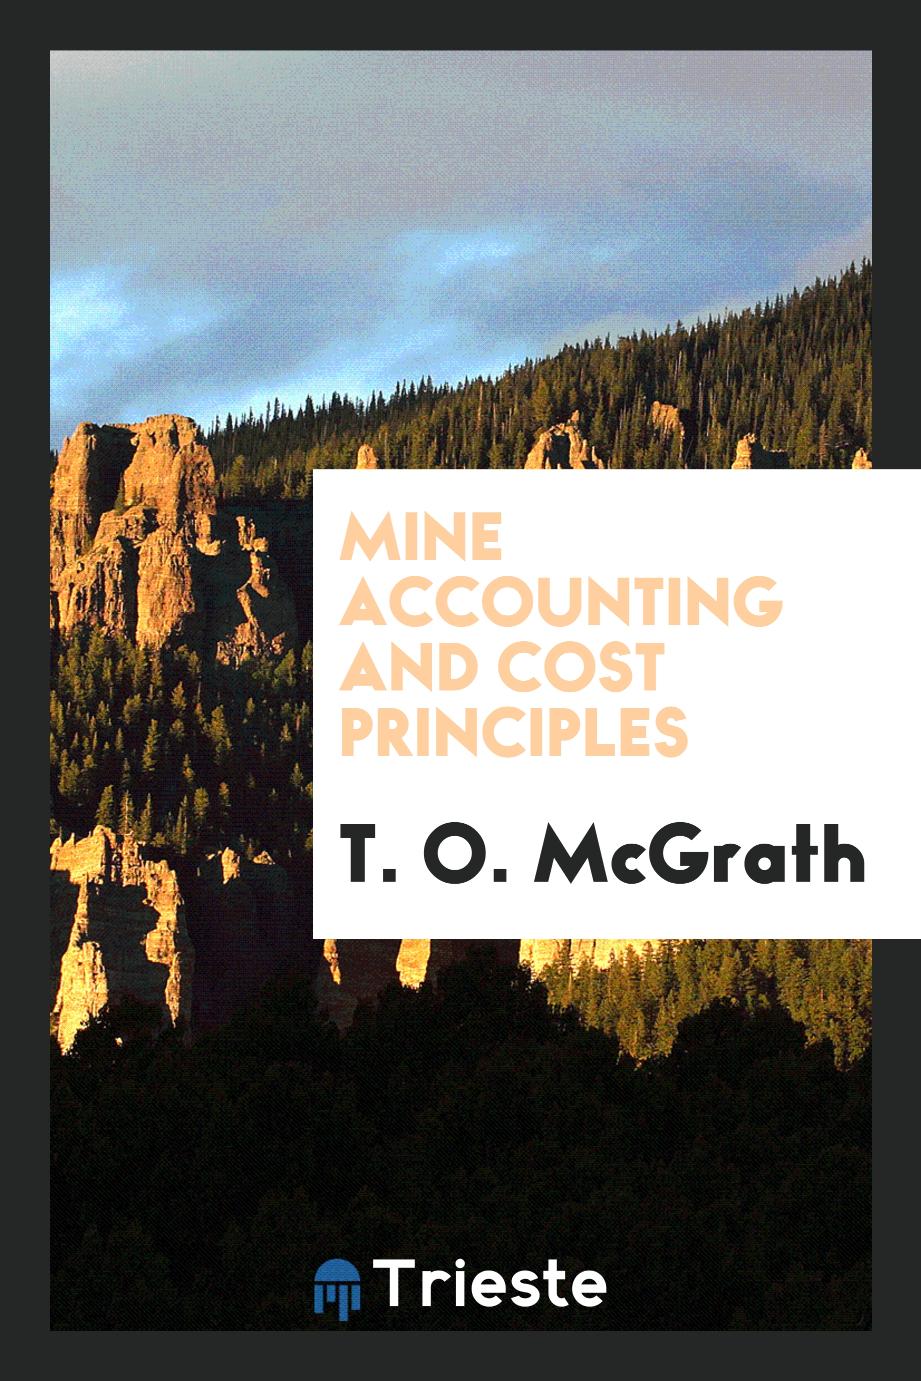 T. O. McGrath - Mine accounting and cost principles